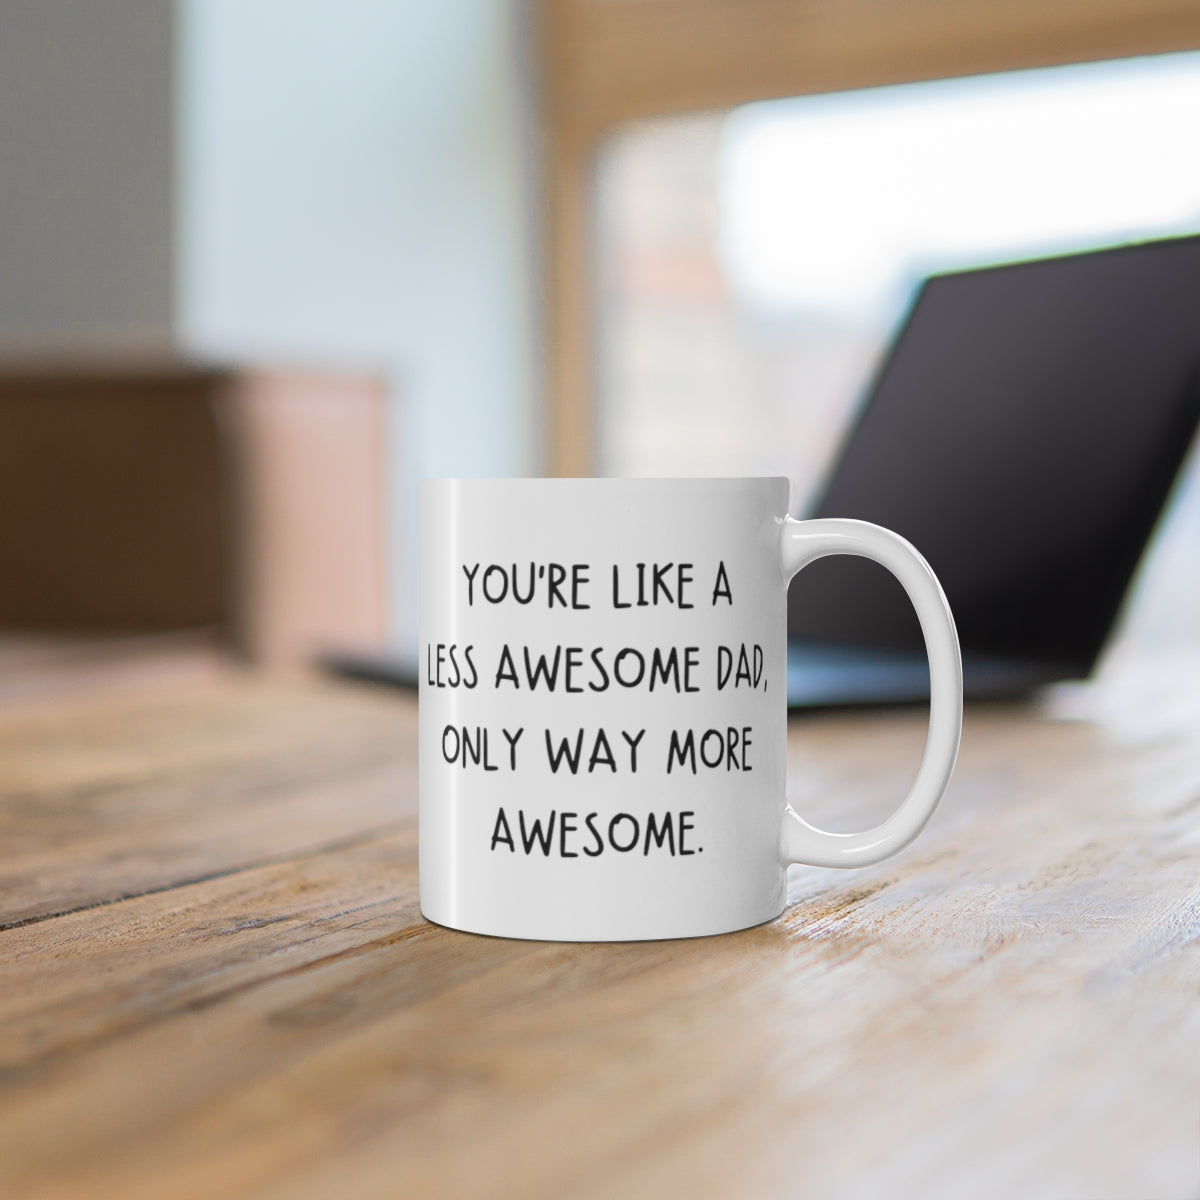 You're Like A Less Awesome Dad, Only Way More Awesome | Funny, Snarky Gift | White Ceramic Mug, Handwritten Font